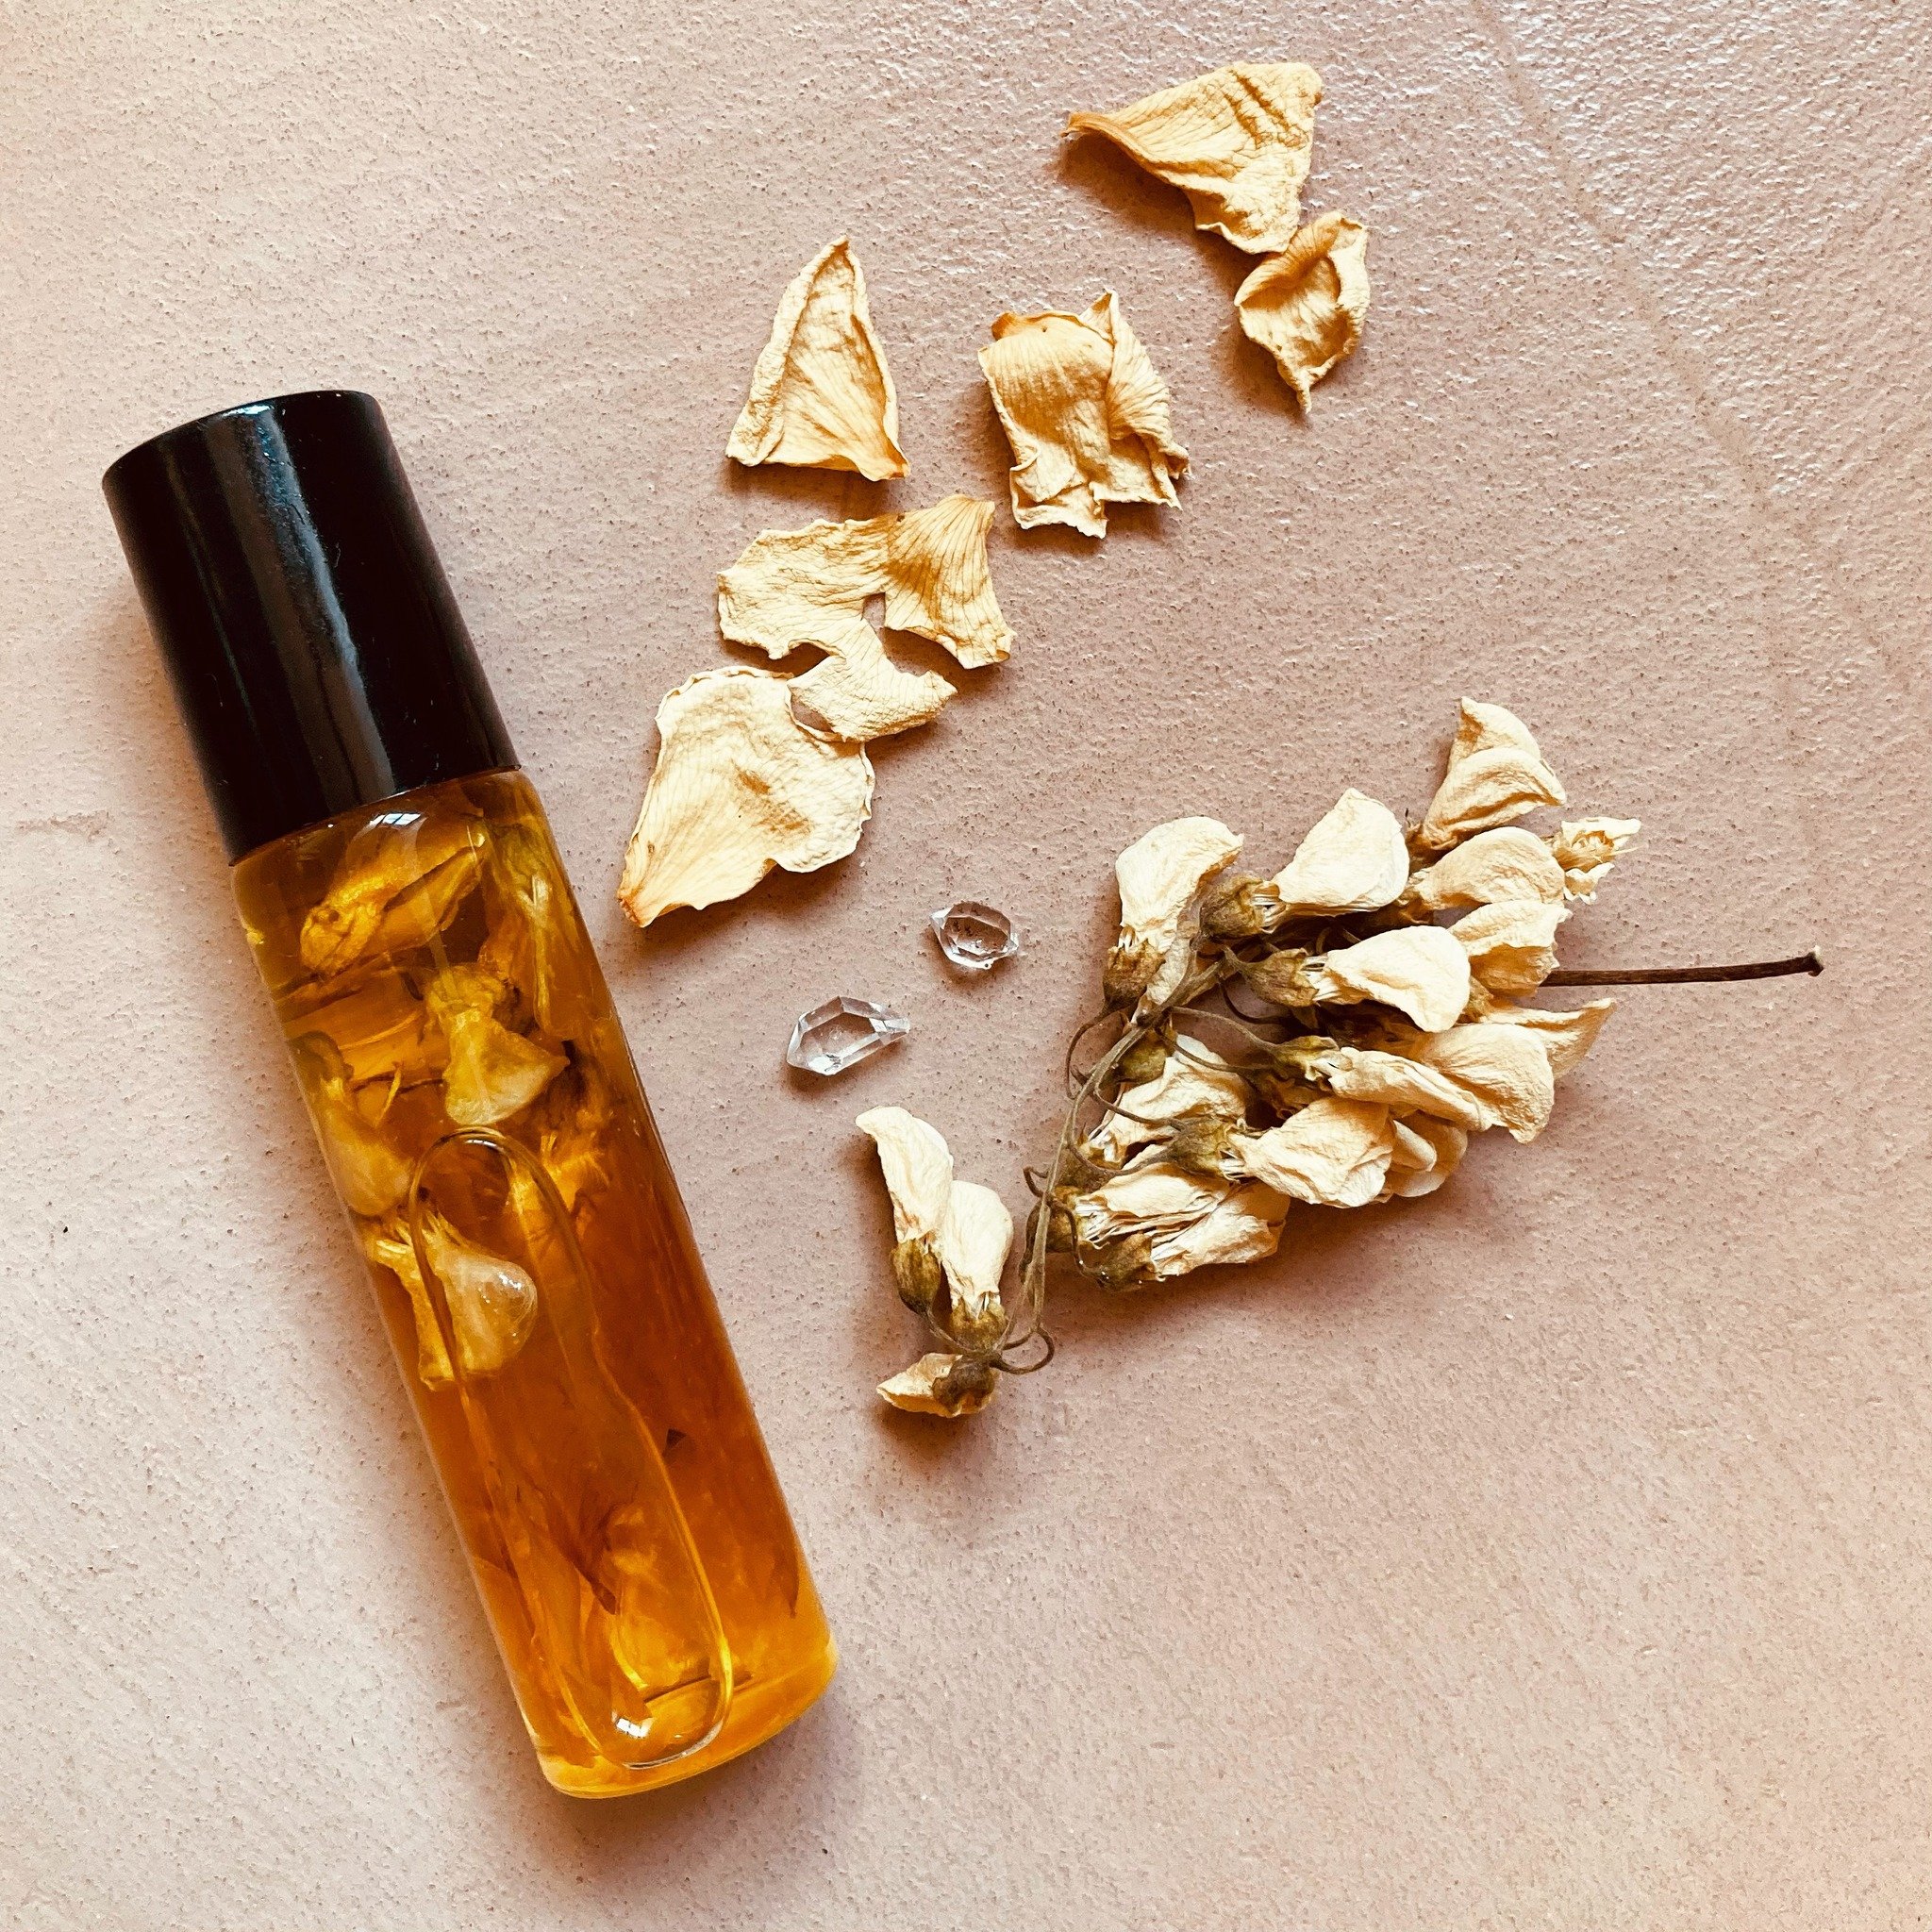 A sublime small batch of vibrational anointing oils has been born. Featured here is the Immanence Parfum which features rose, black locust and frankincense extracts, magnolia, orange and rosewood essential oils, and an exquisite Herkimer Diamond. The